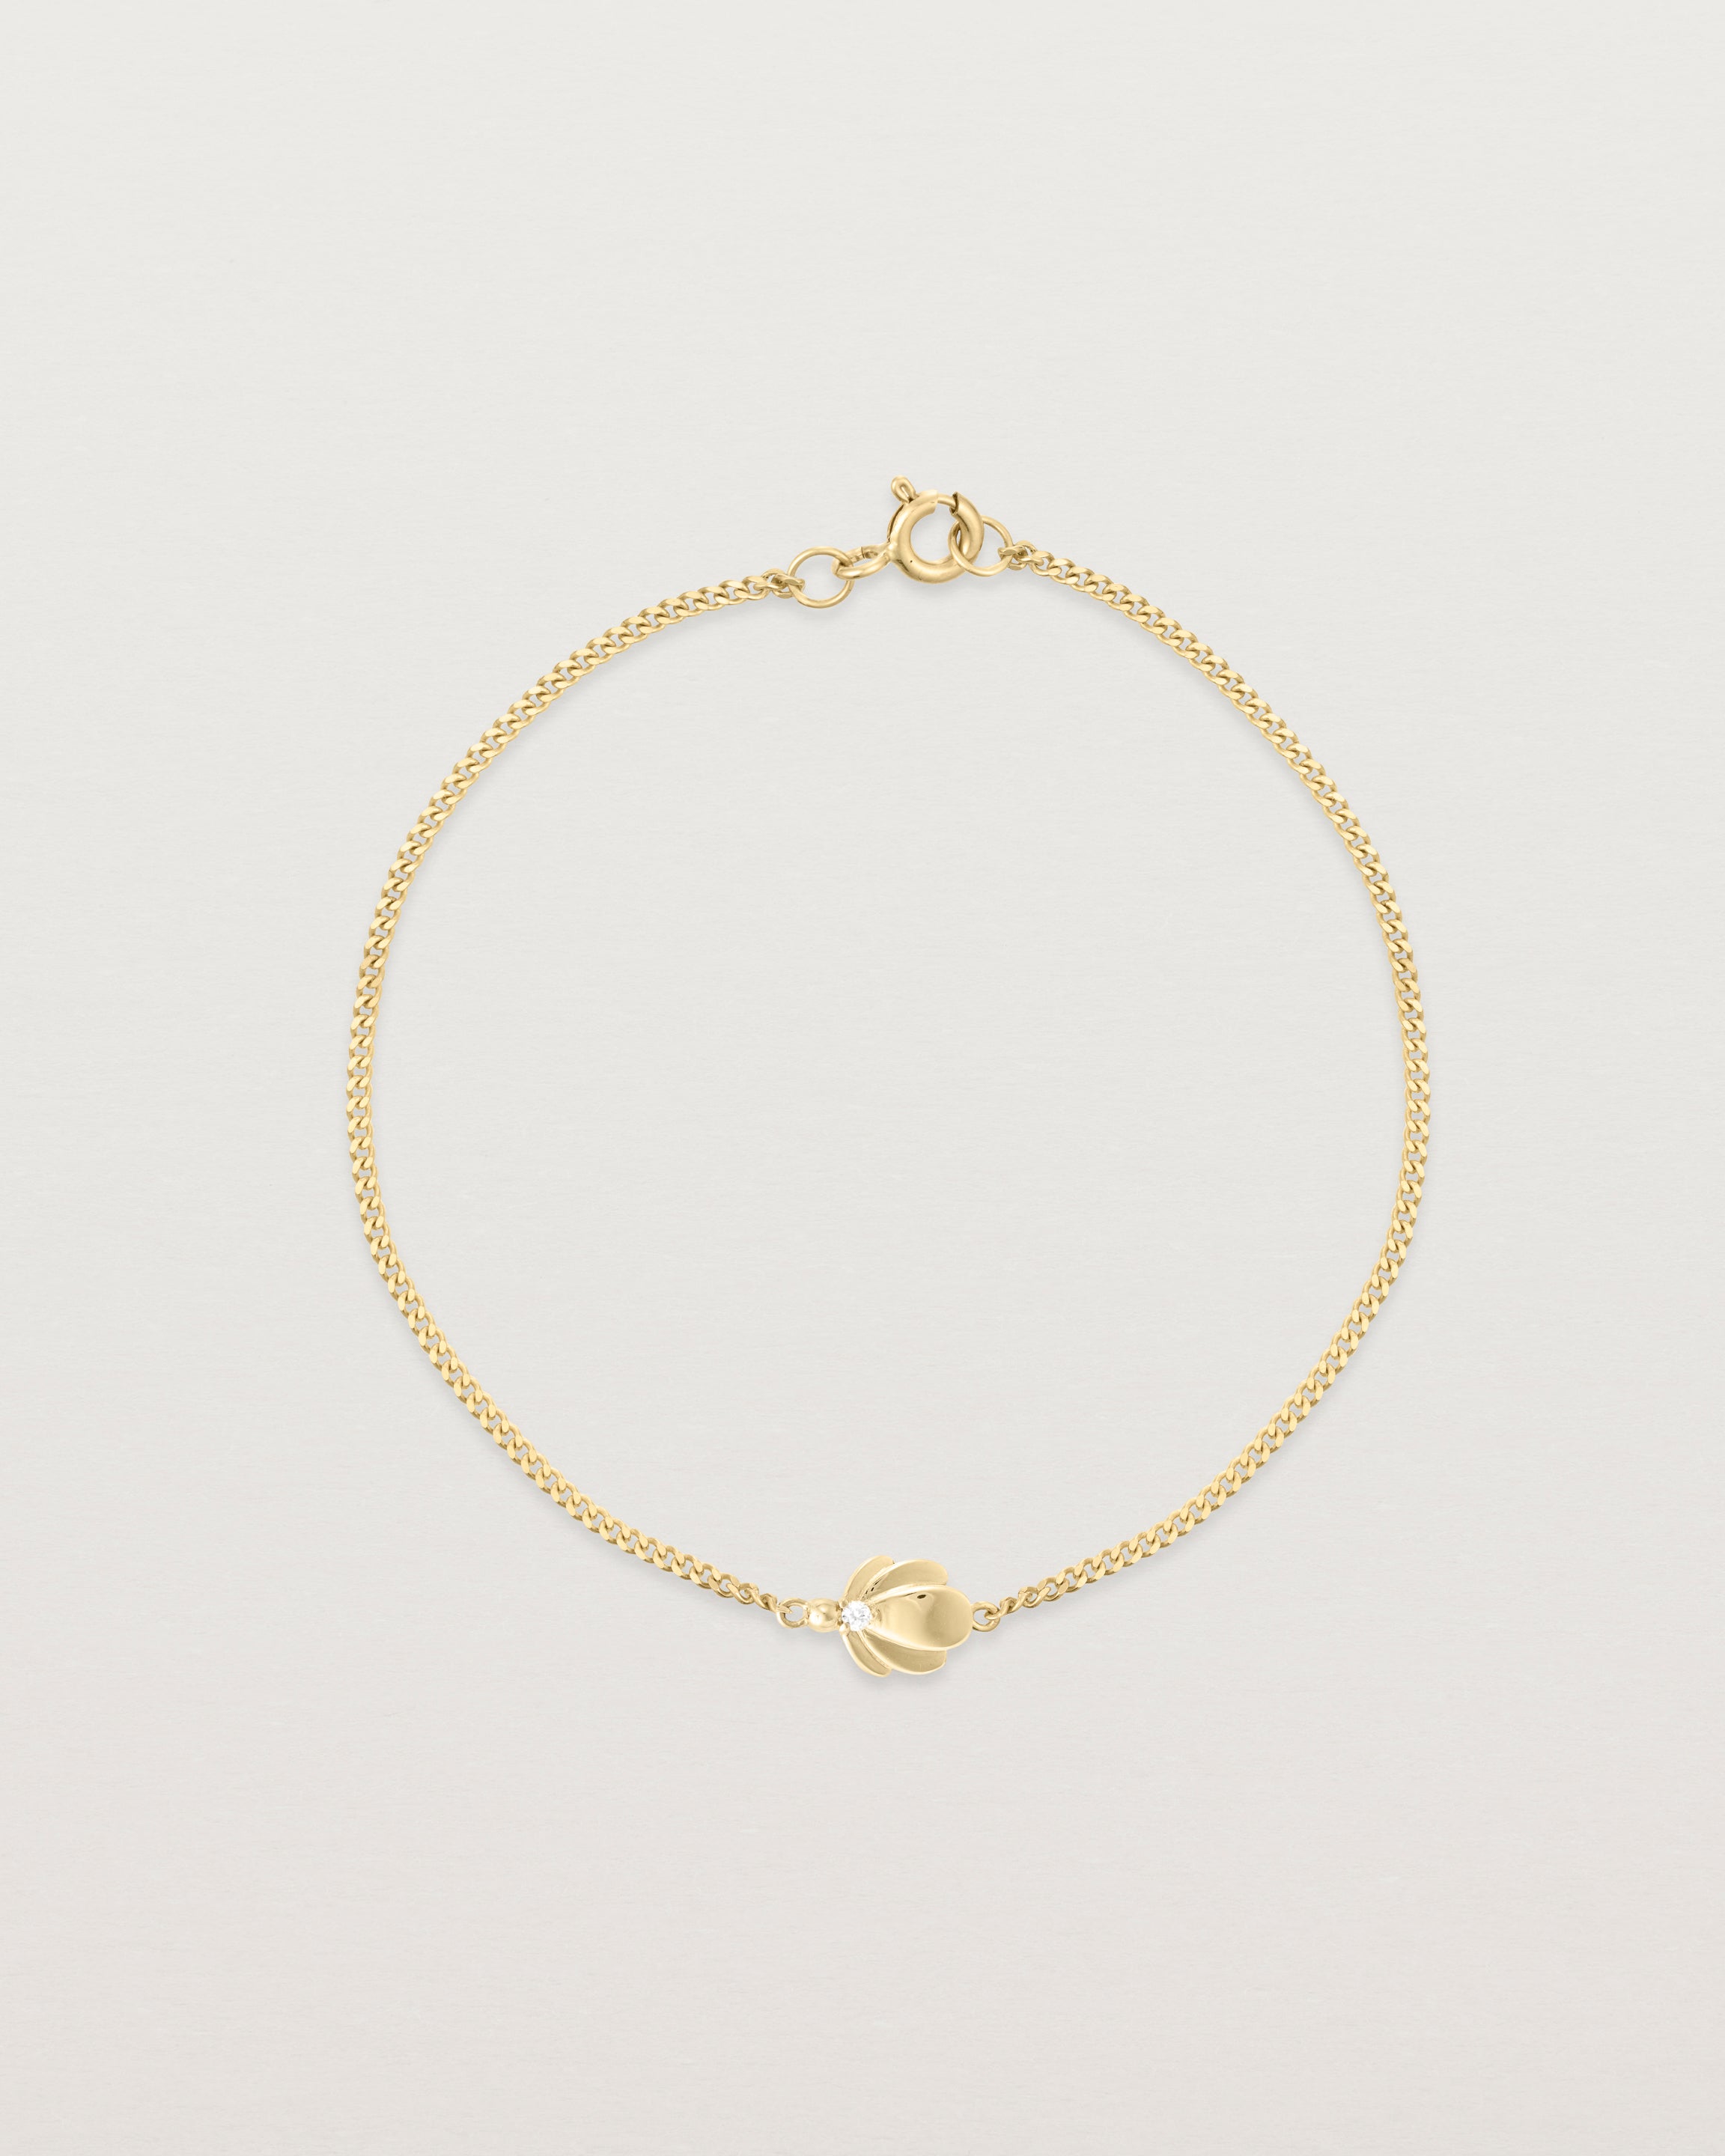 Top down view of the Aeris Bracelet | Diamond in yellow gold.